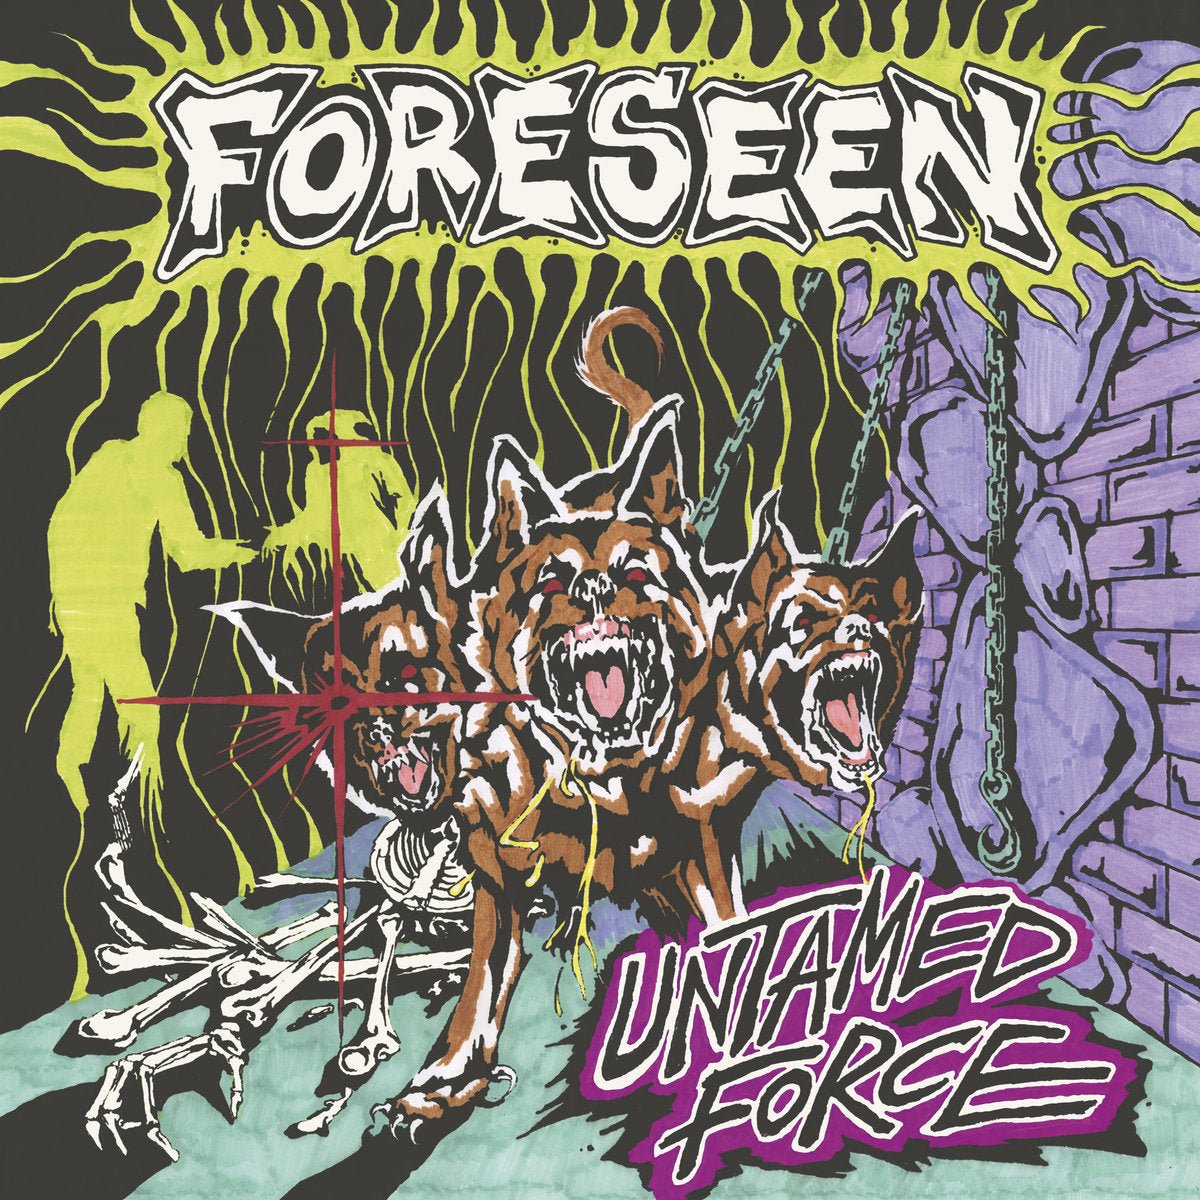 Foreseen - Untamed Force LP - Vinyl - Quality Control